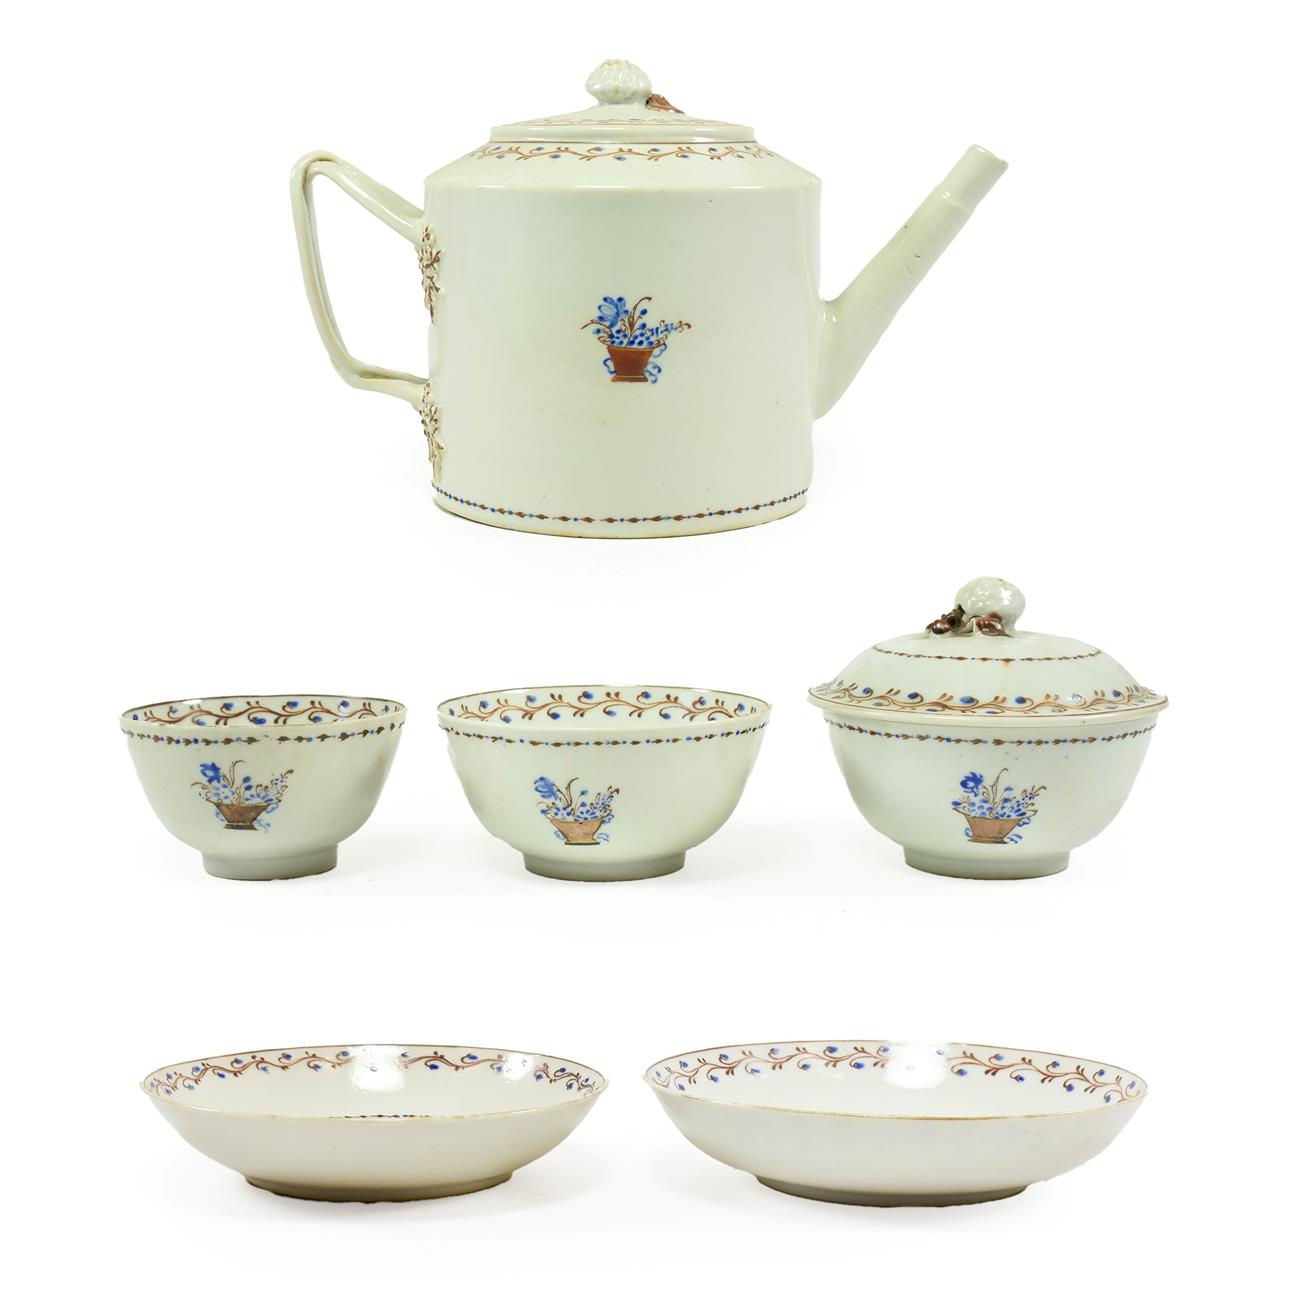 Lot 84 - A Chinese Porcelain Tea Service, circa 1790, painted with a basket of flowers within a floral...